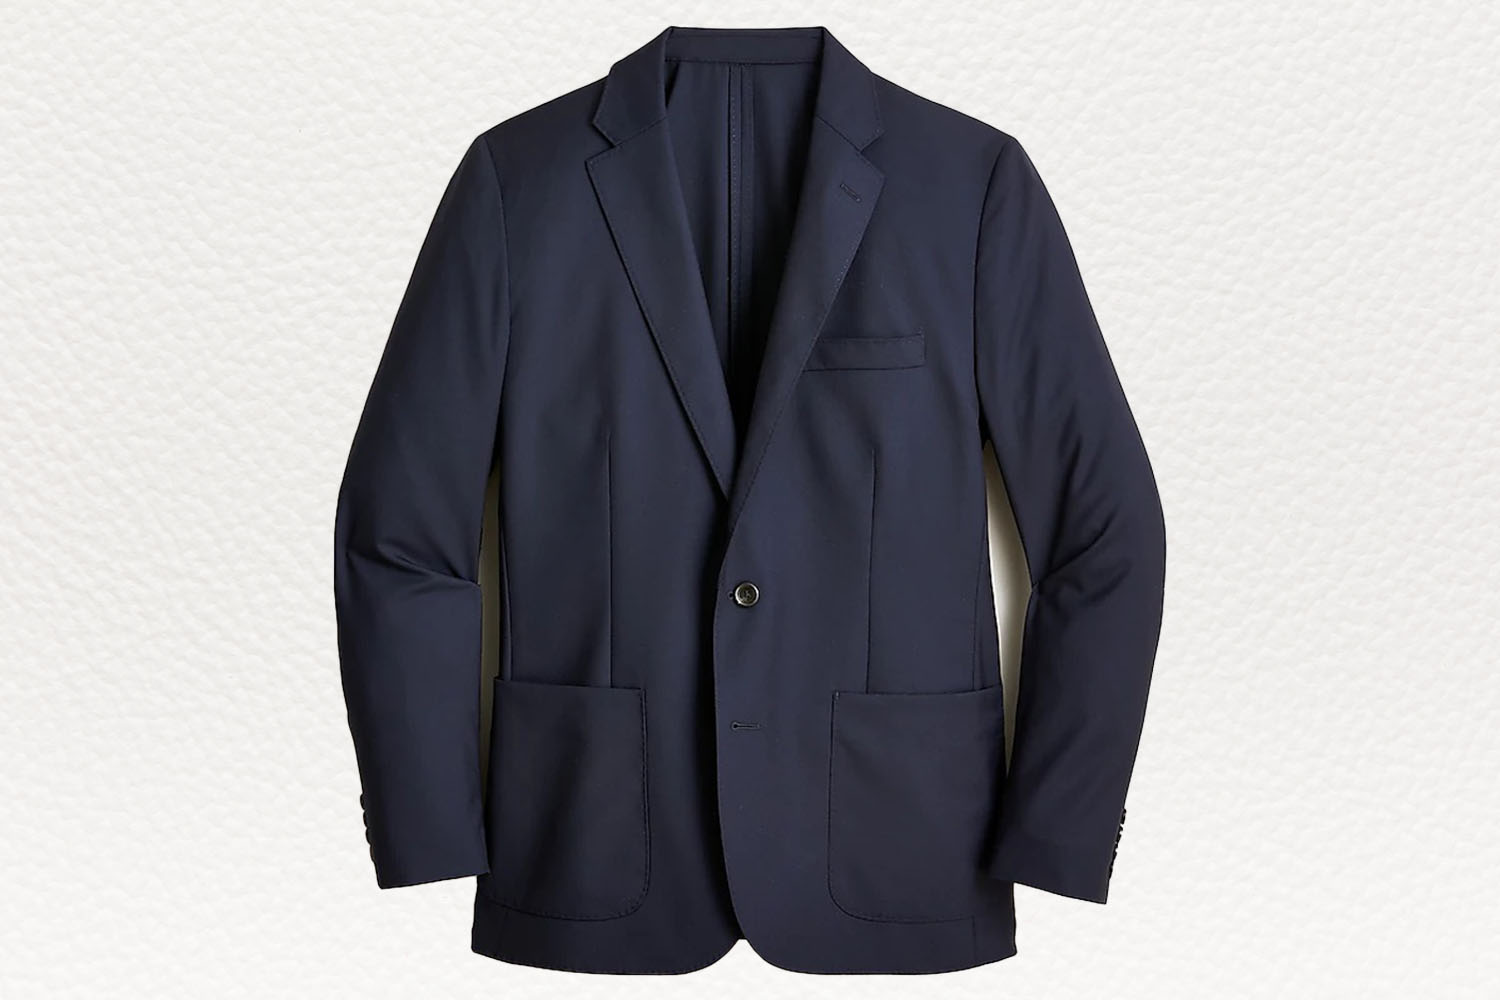 a navy blue blazer from J.Crew on a white textured background